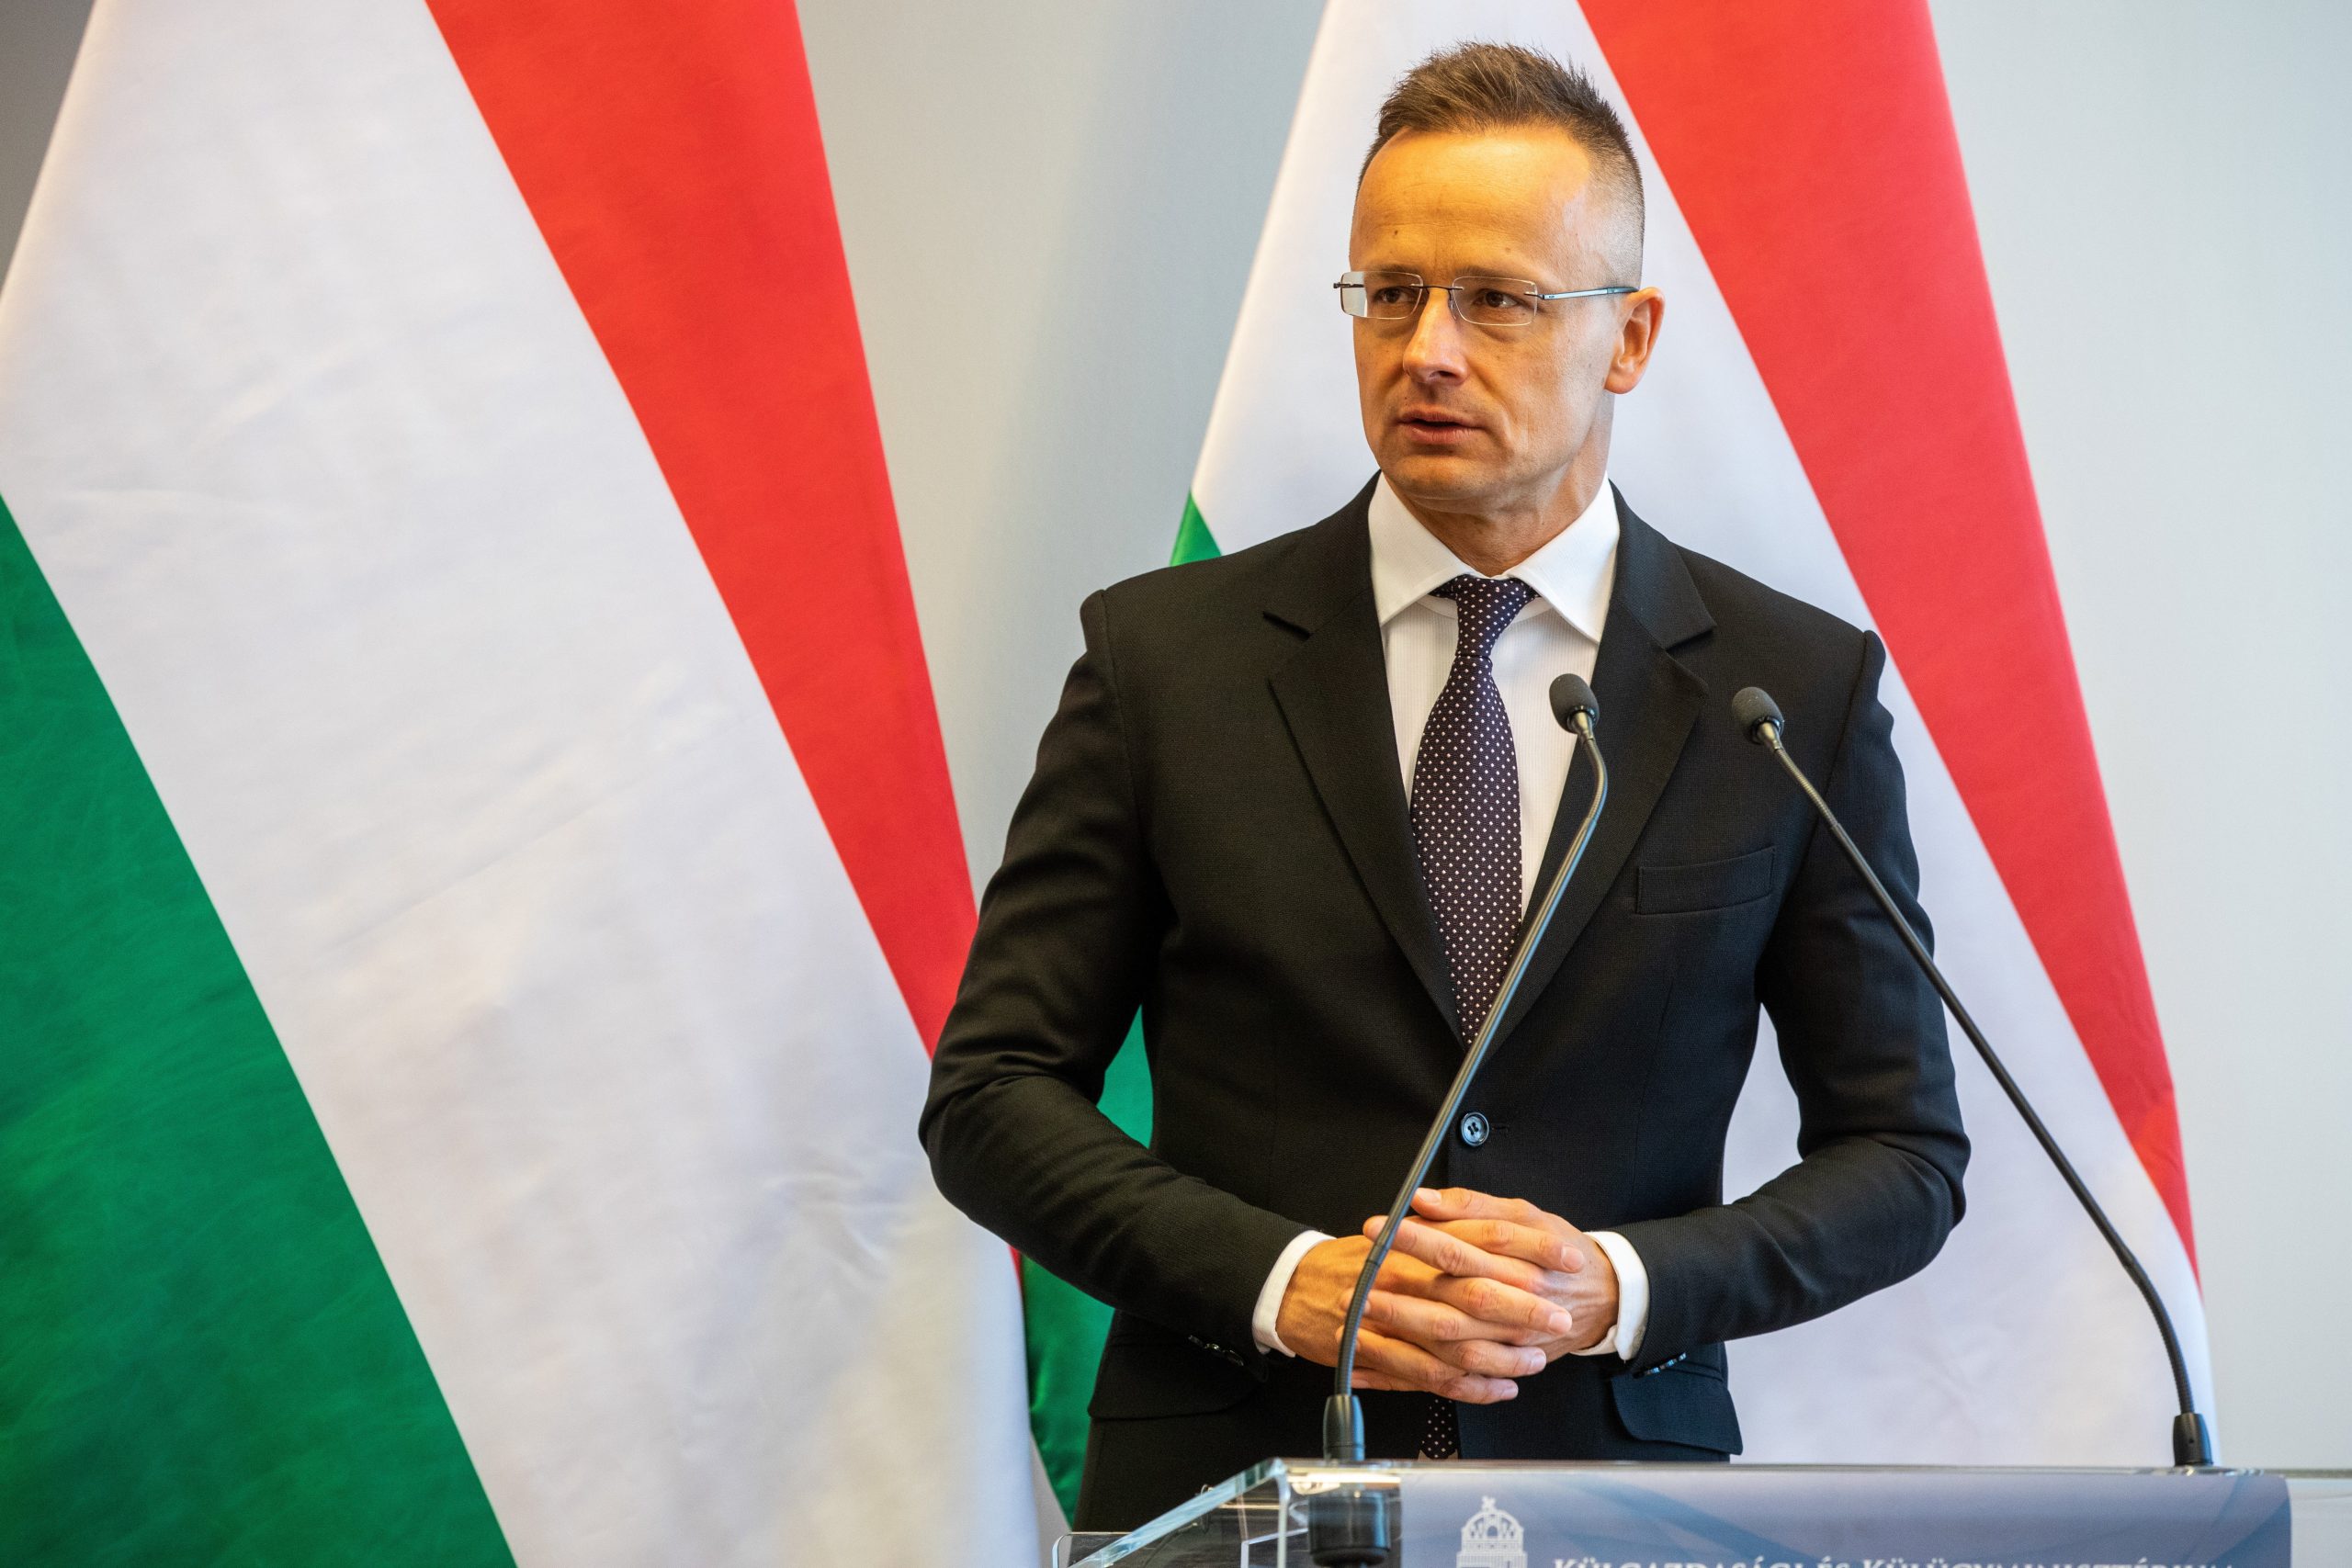 Foreign Minister: Hungary, Croatia to Expand Energy Cooperation, Pipeline Capacity